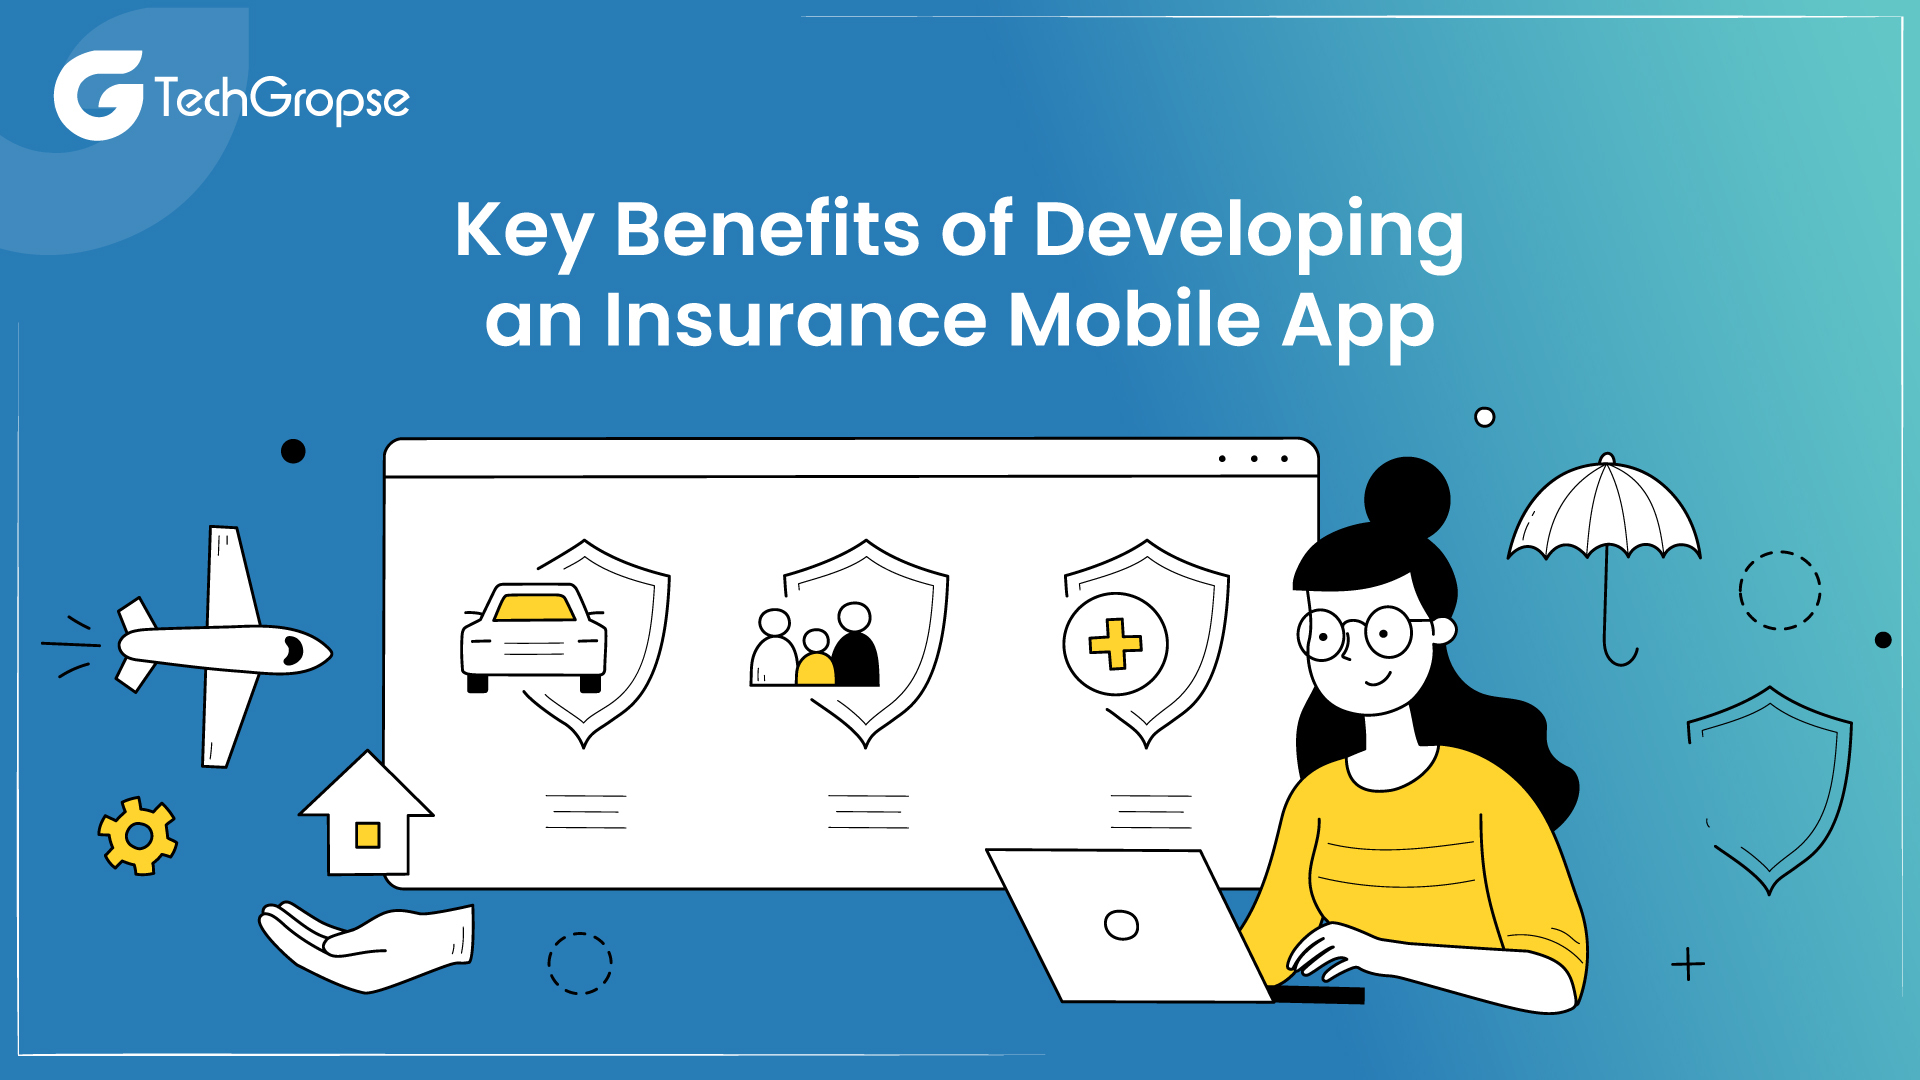 Key Benefits of Developing an Insurance Mobile App